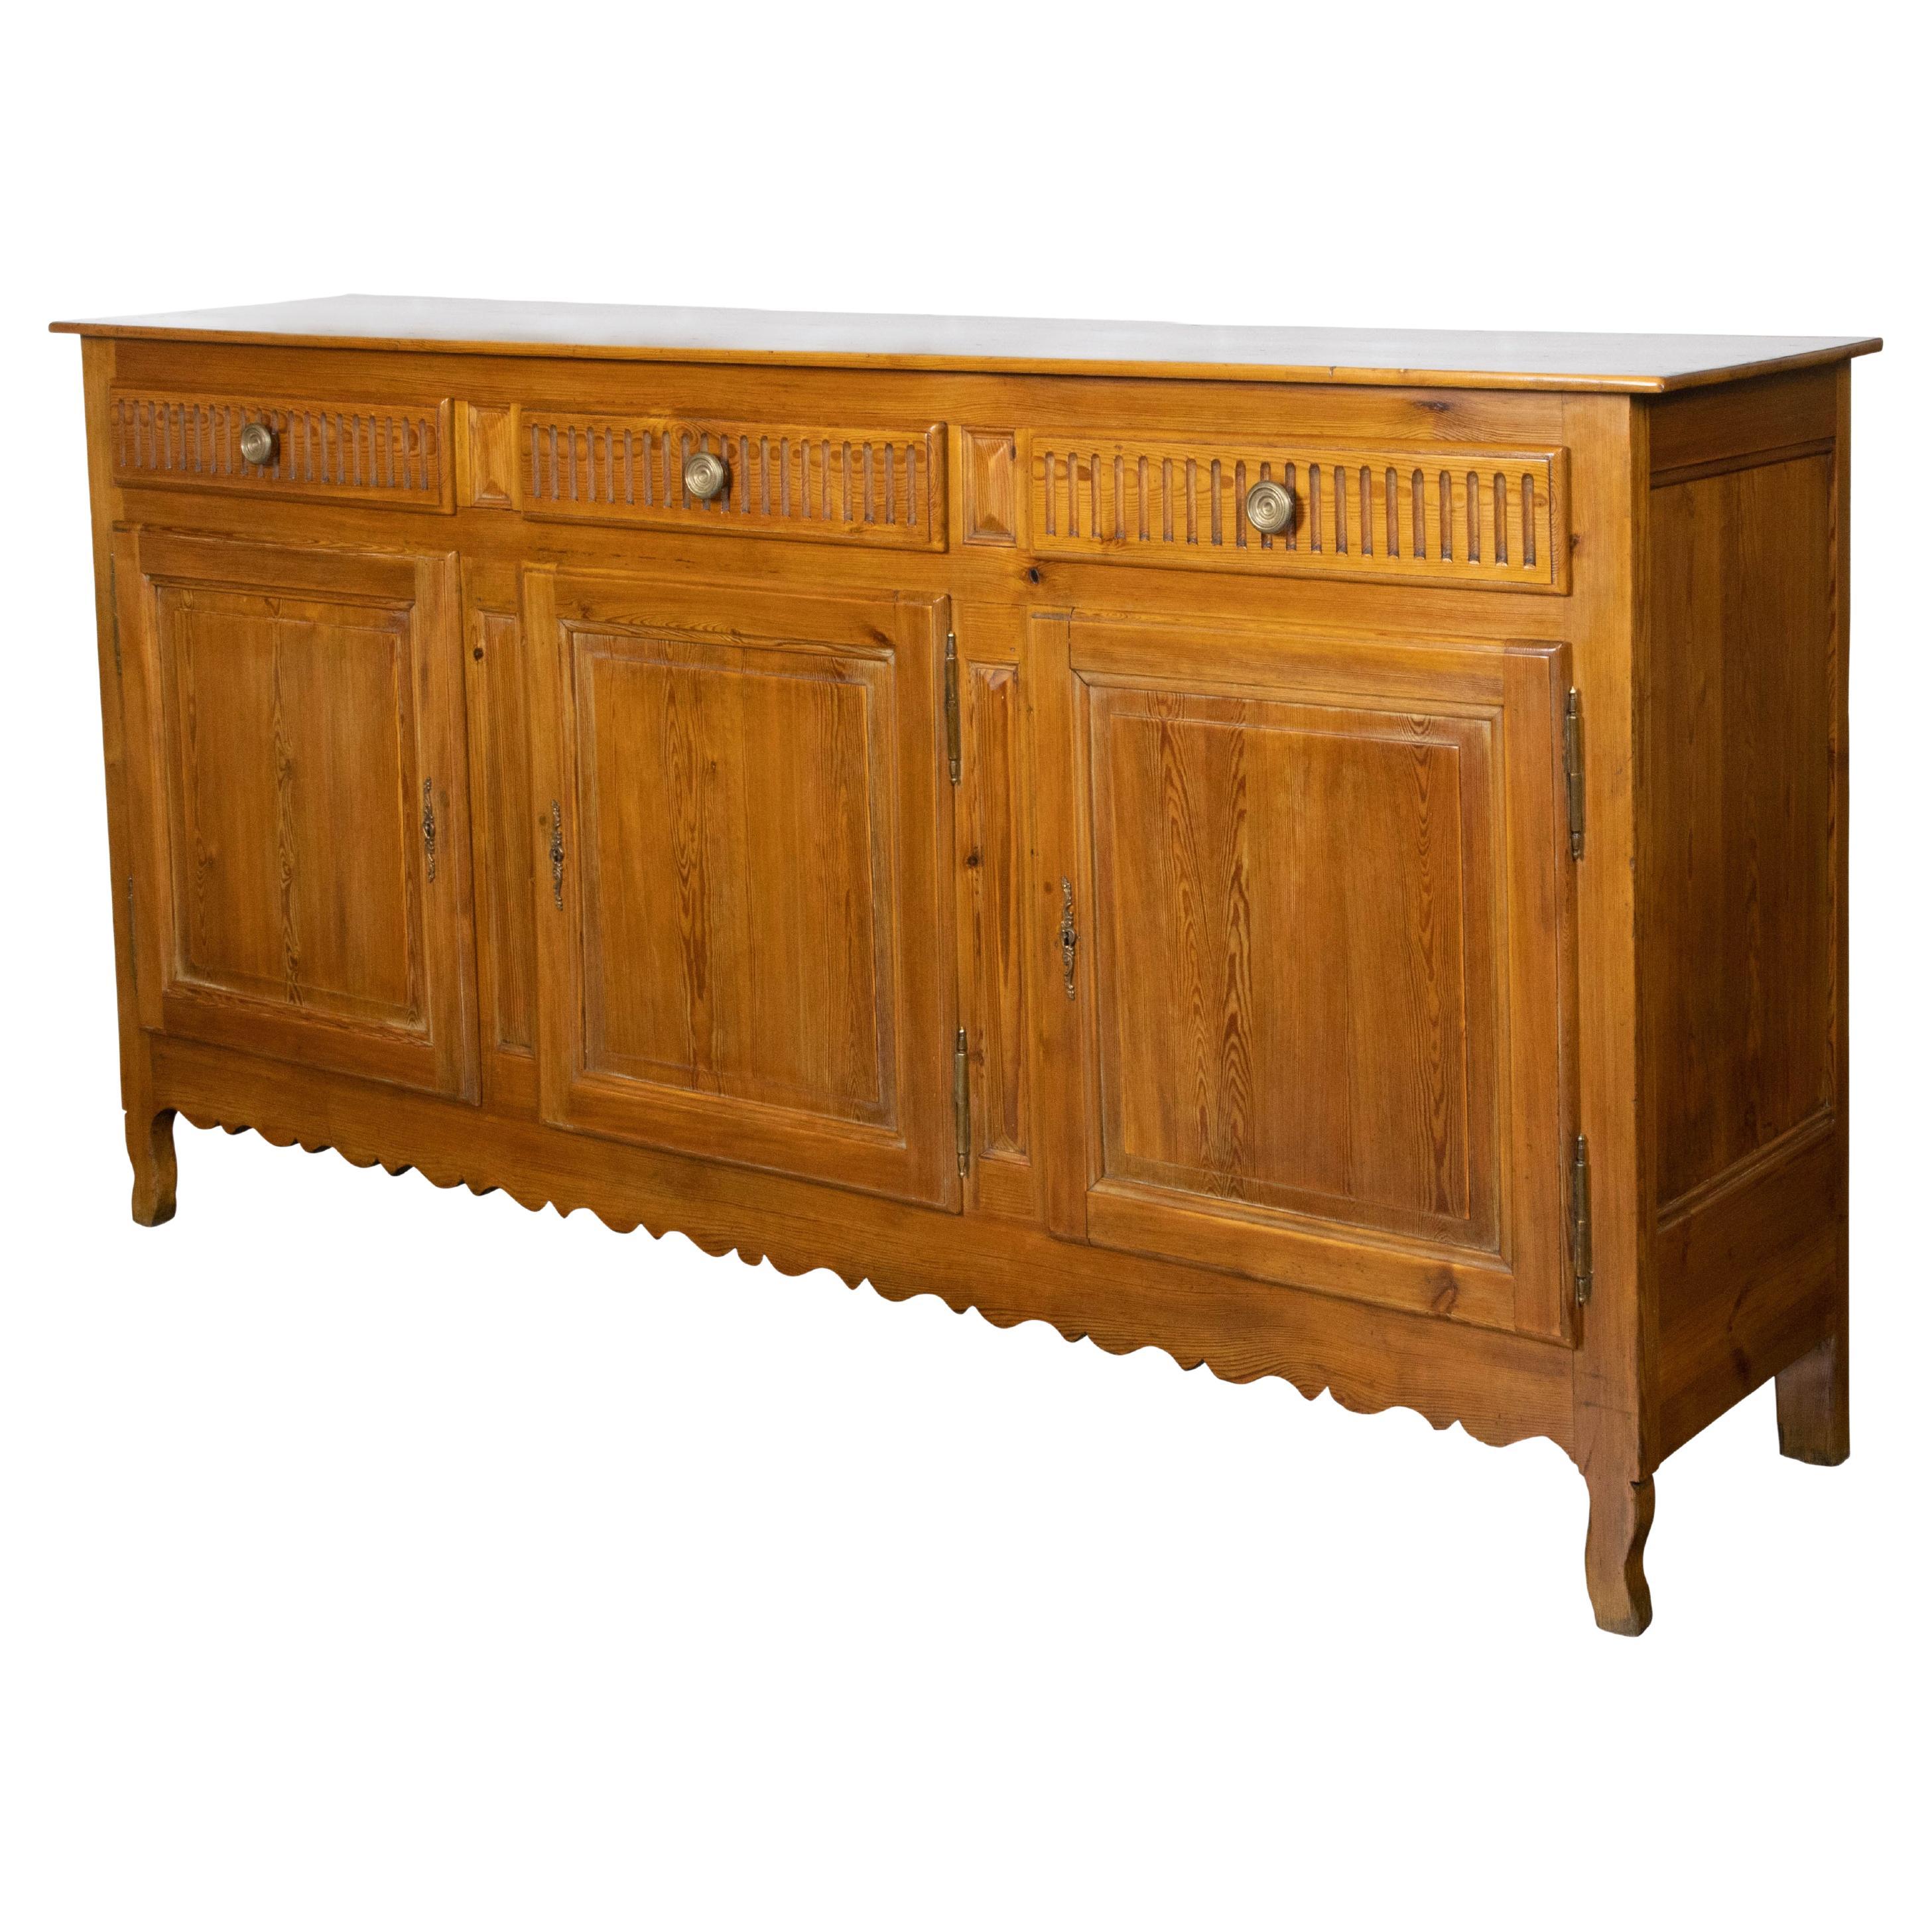 French Transition Style 19th Century Pine Buffet with Drawers over Doors For Sale